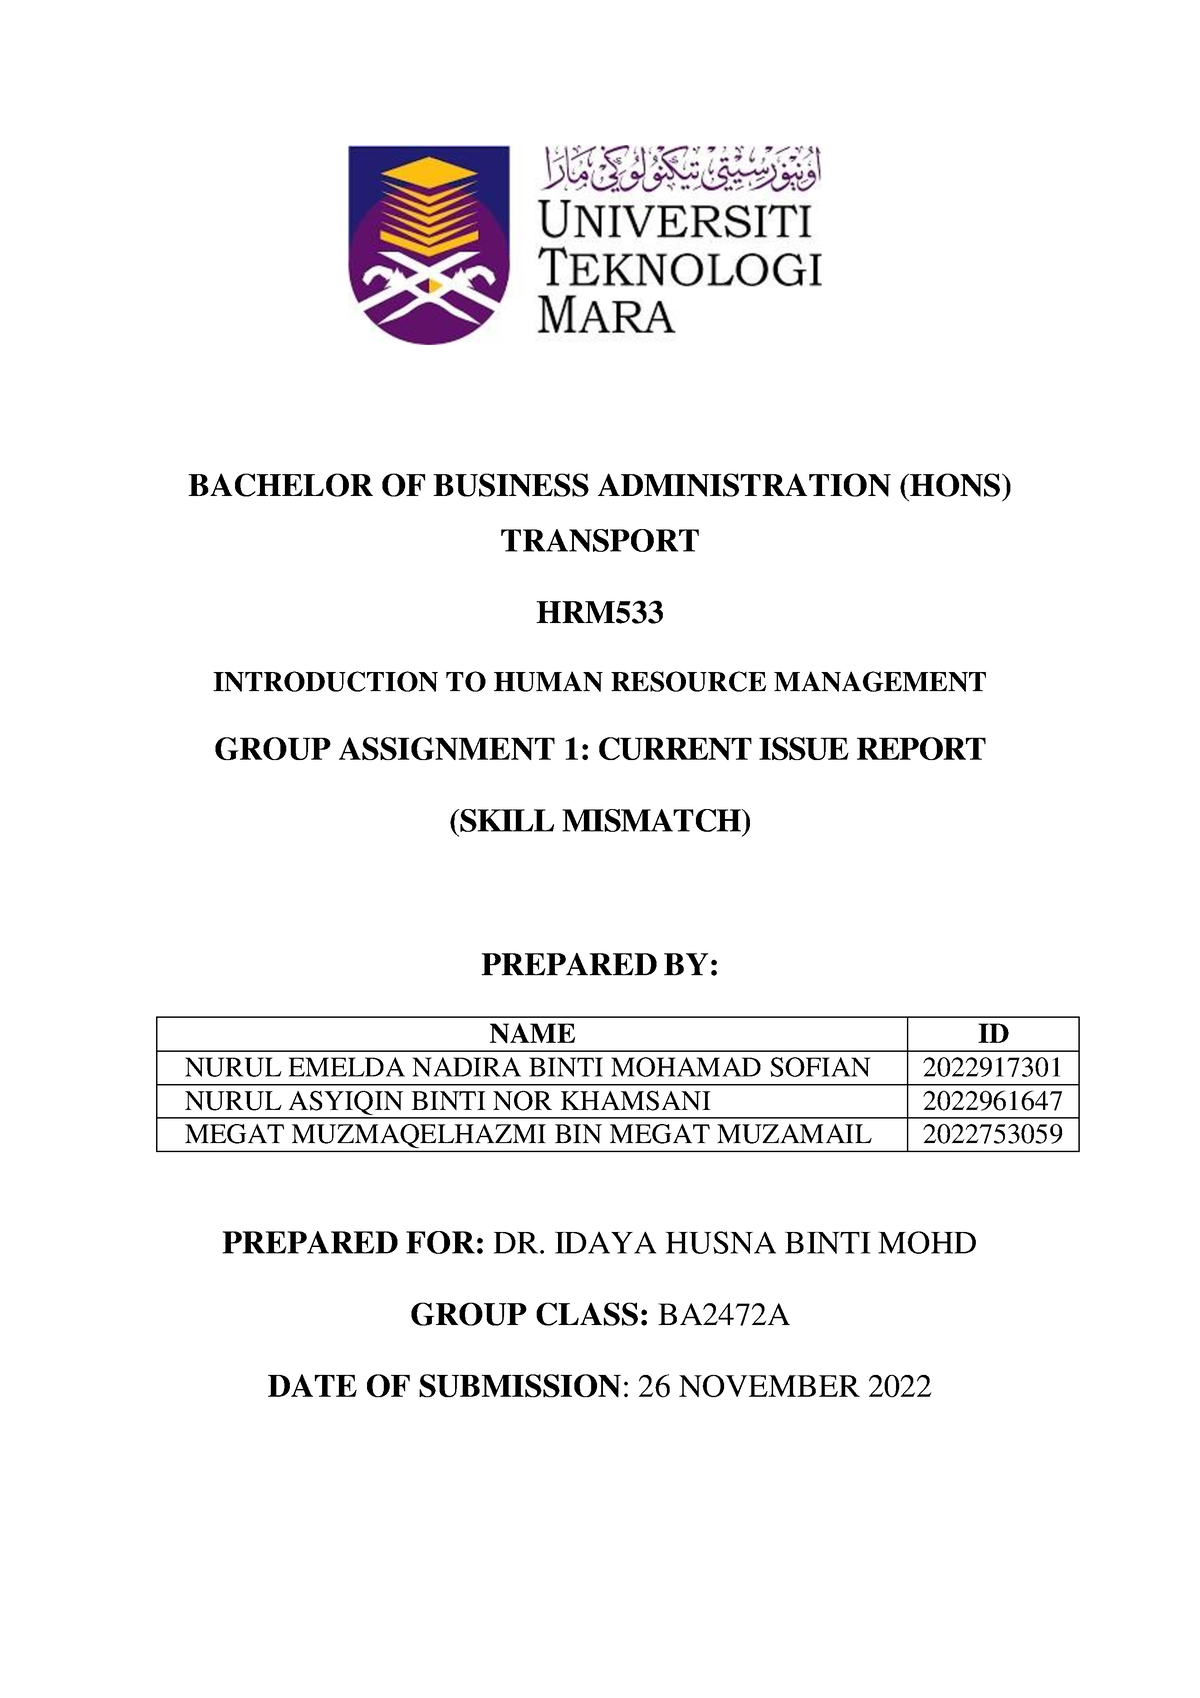 hrm533 group assignment 2